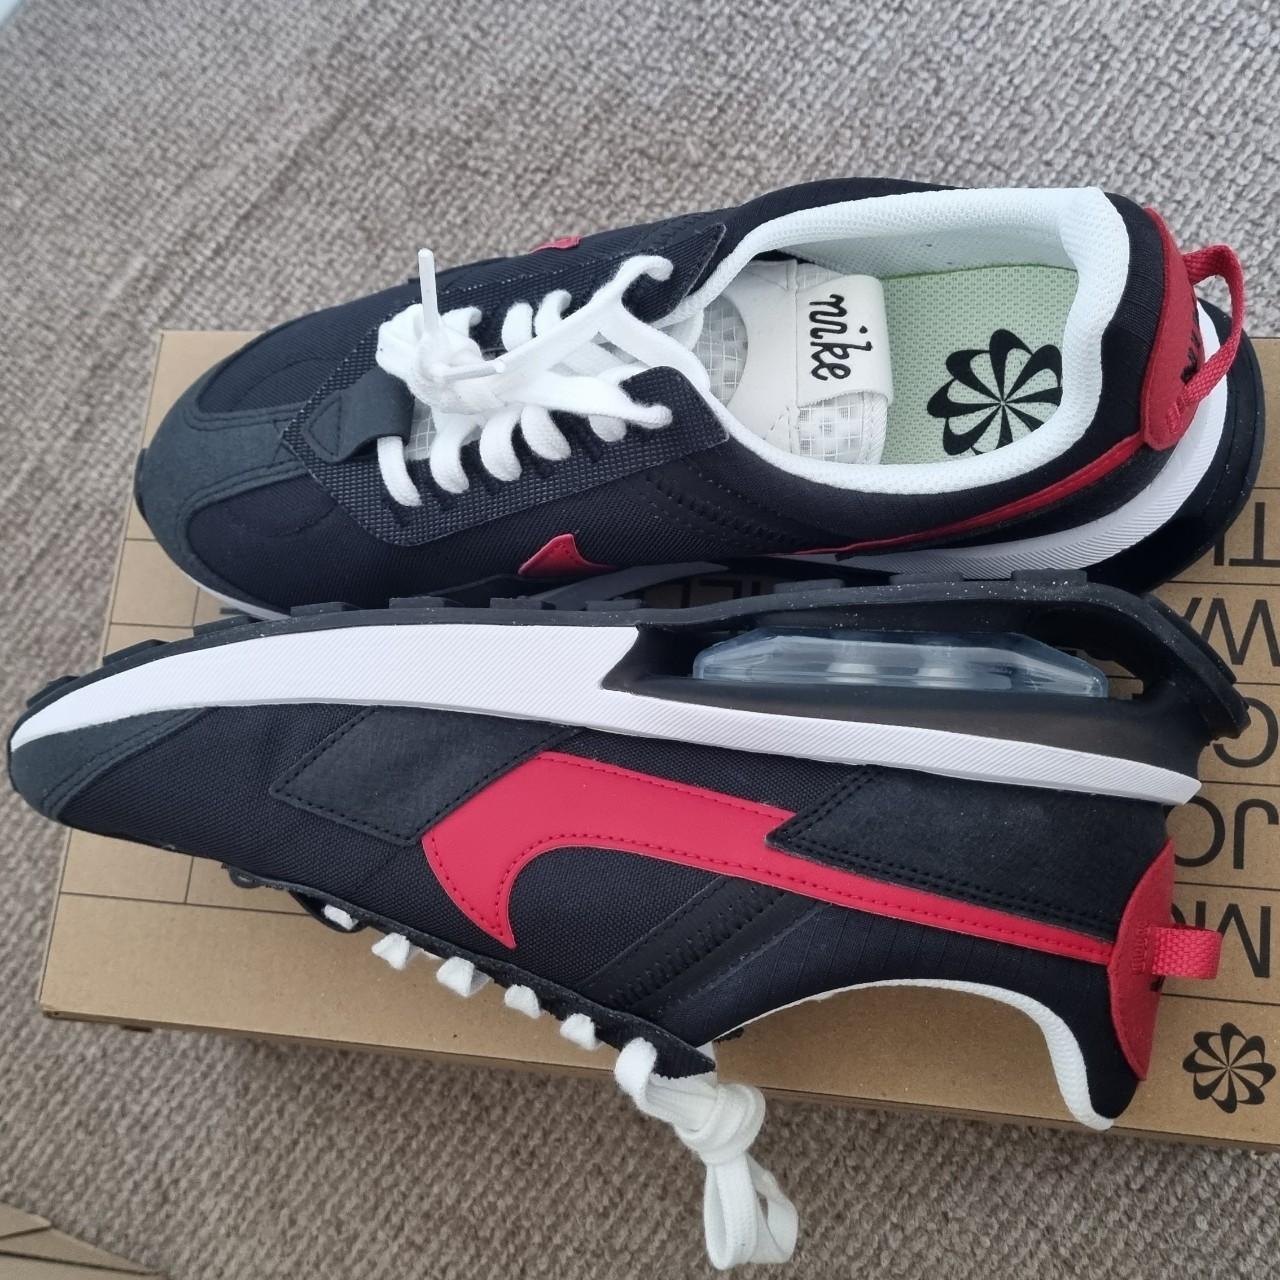 Nike Air Max pre day size 7 brand new - Depop